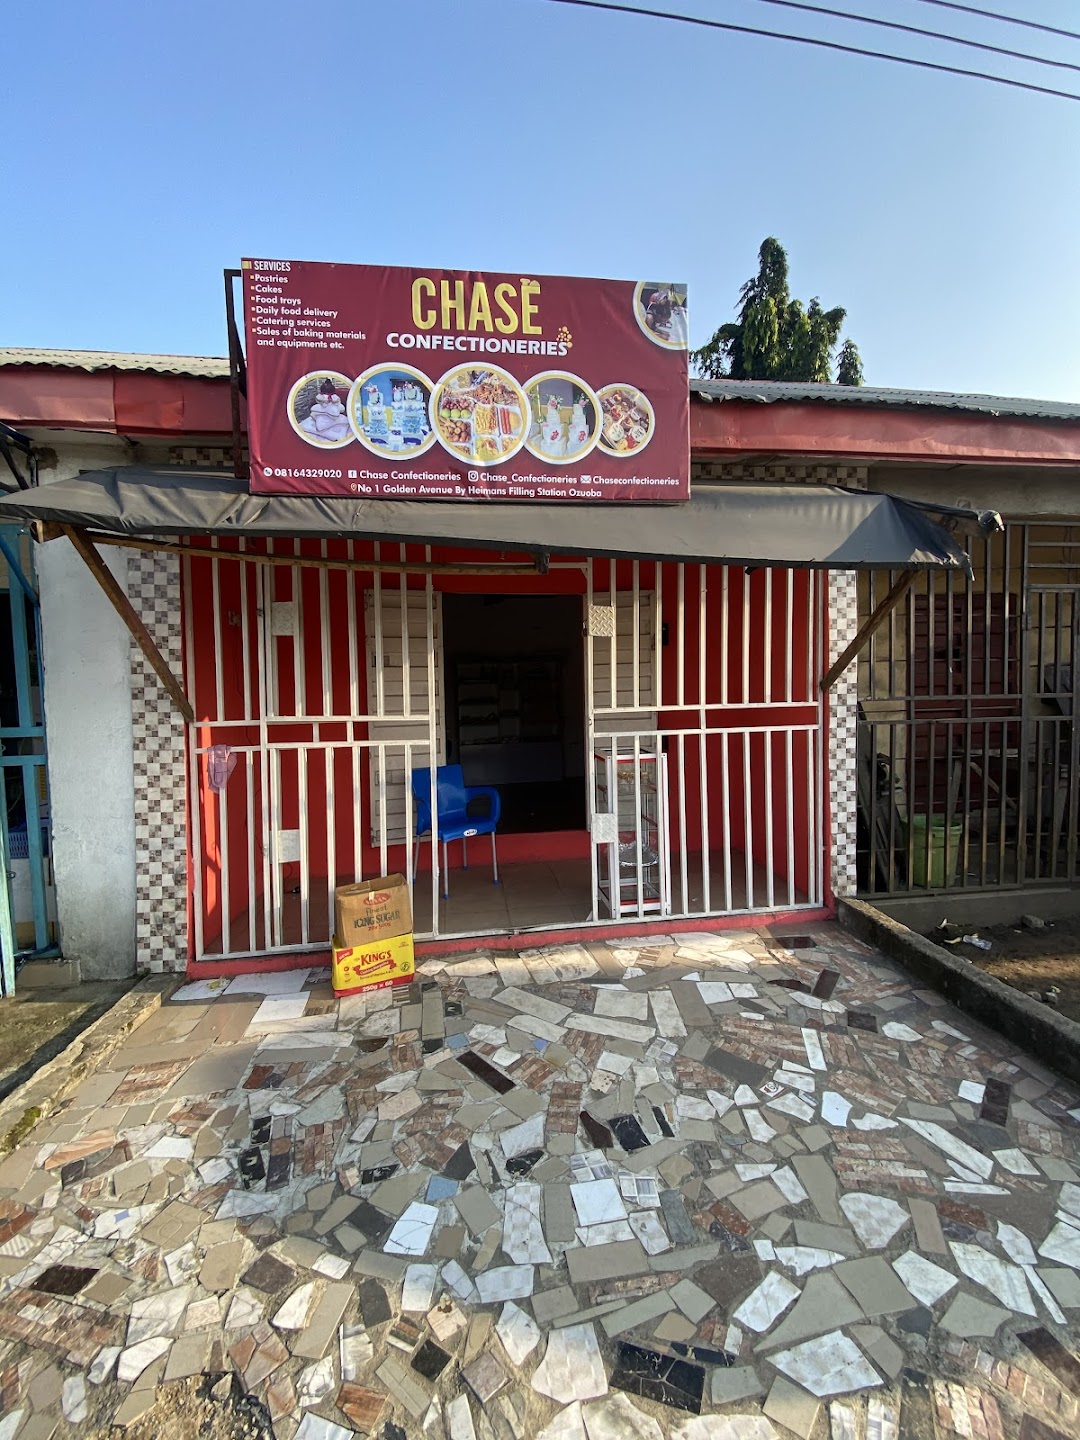 Chase Confectioneries